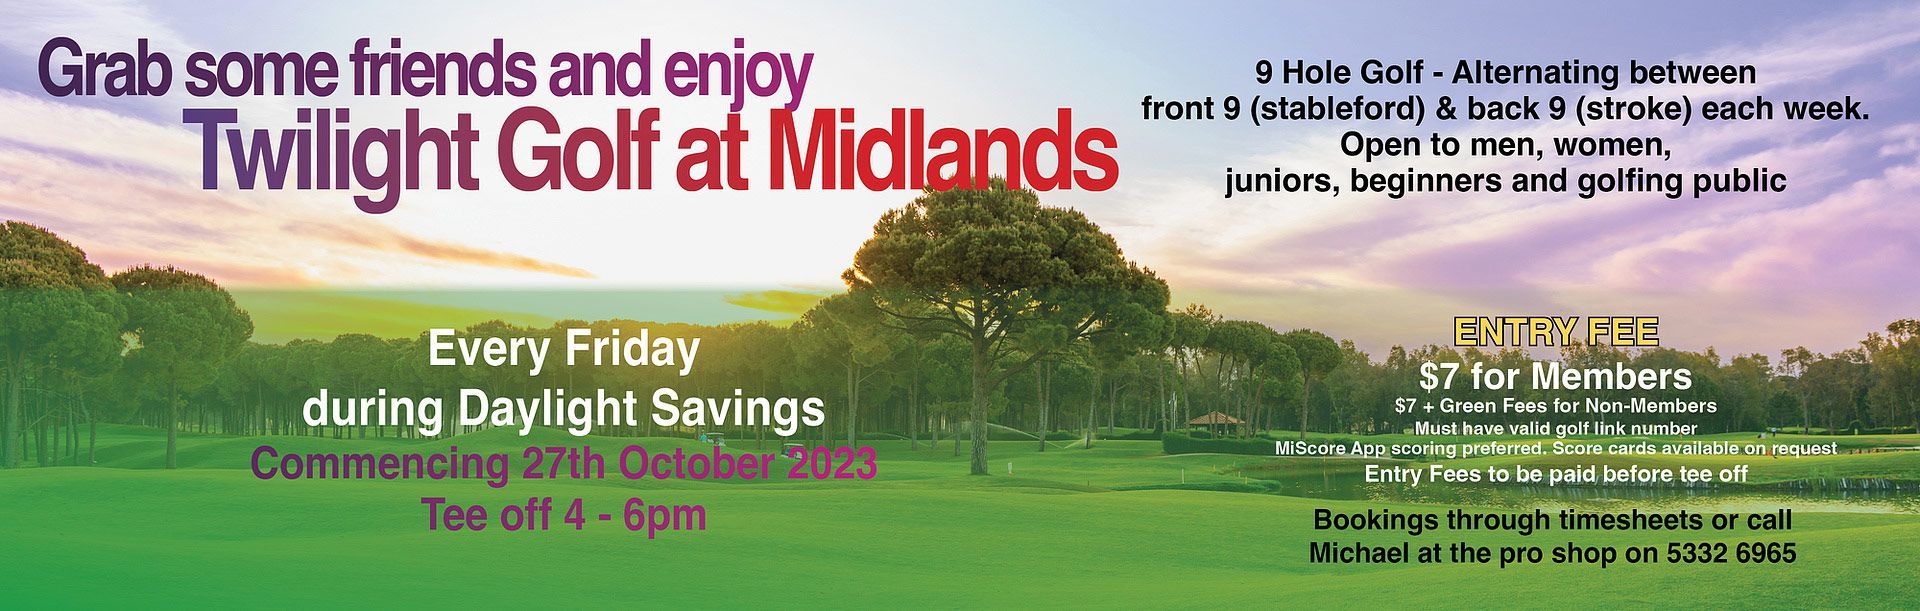 a poster advertising twilight golf at midlands every friday during daylight savings